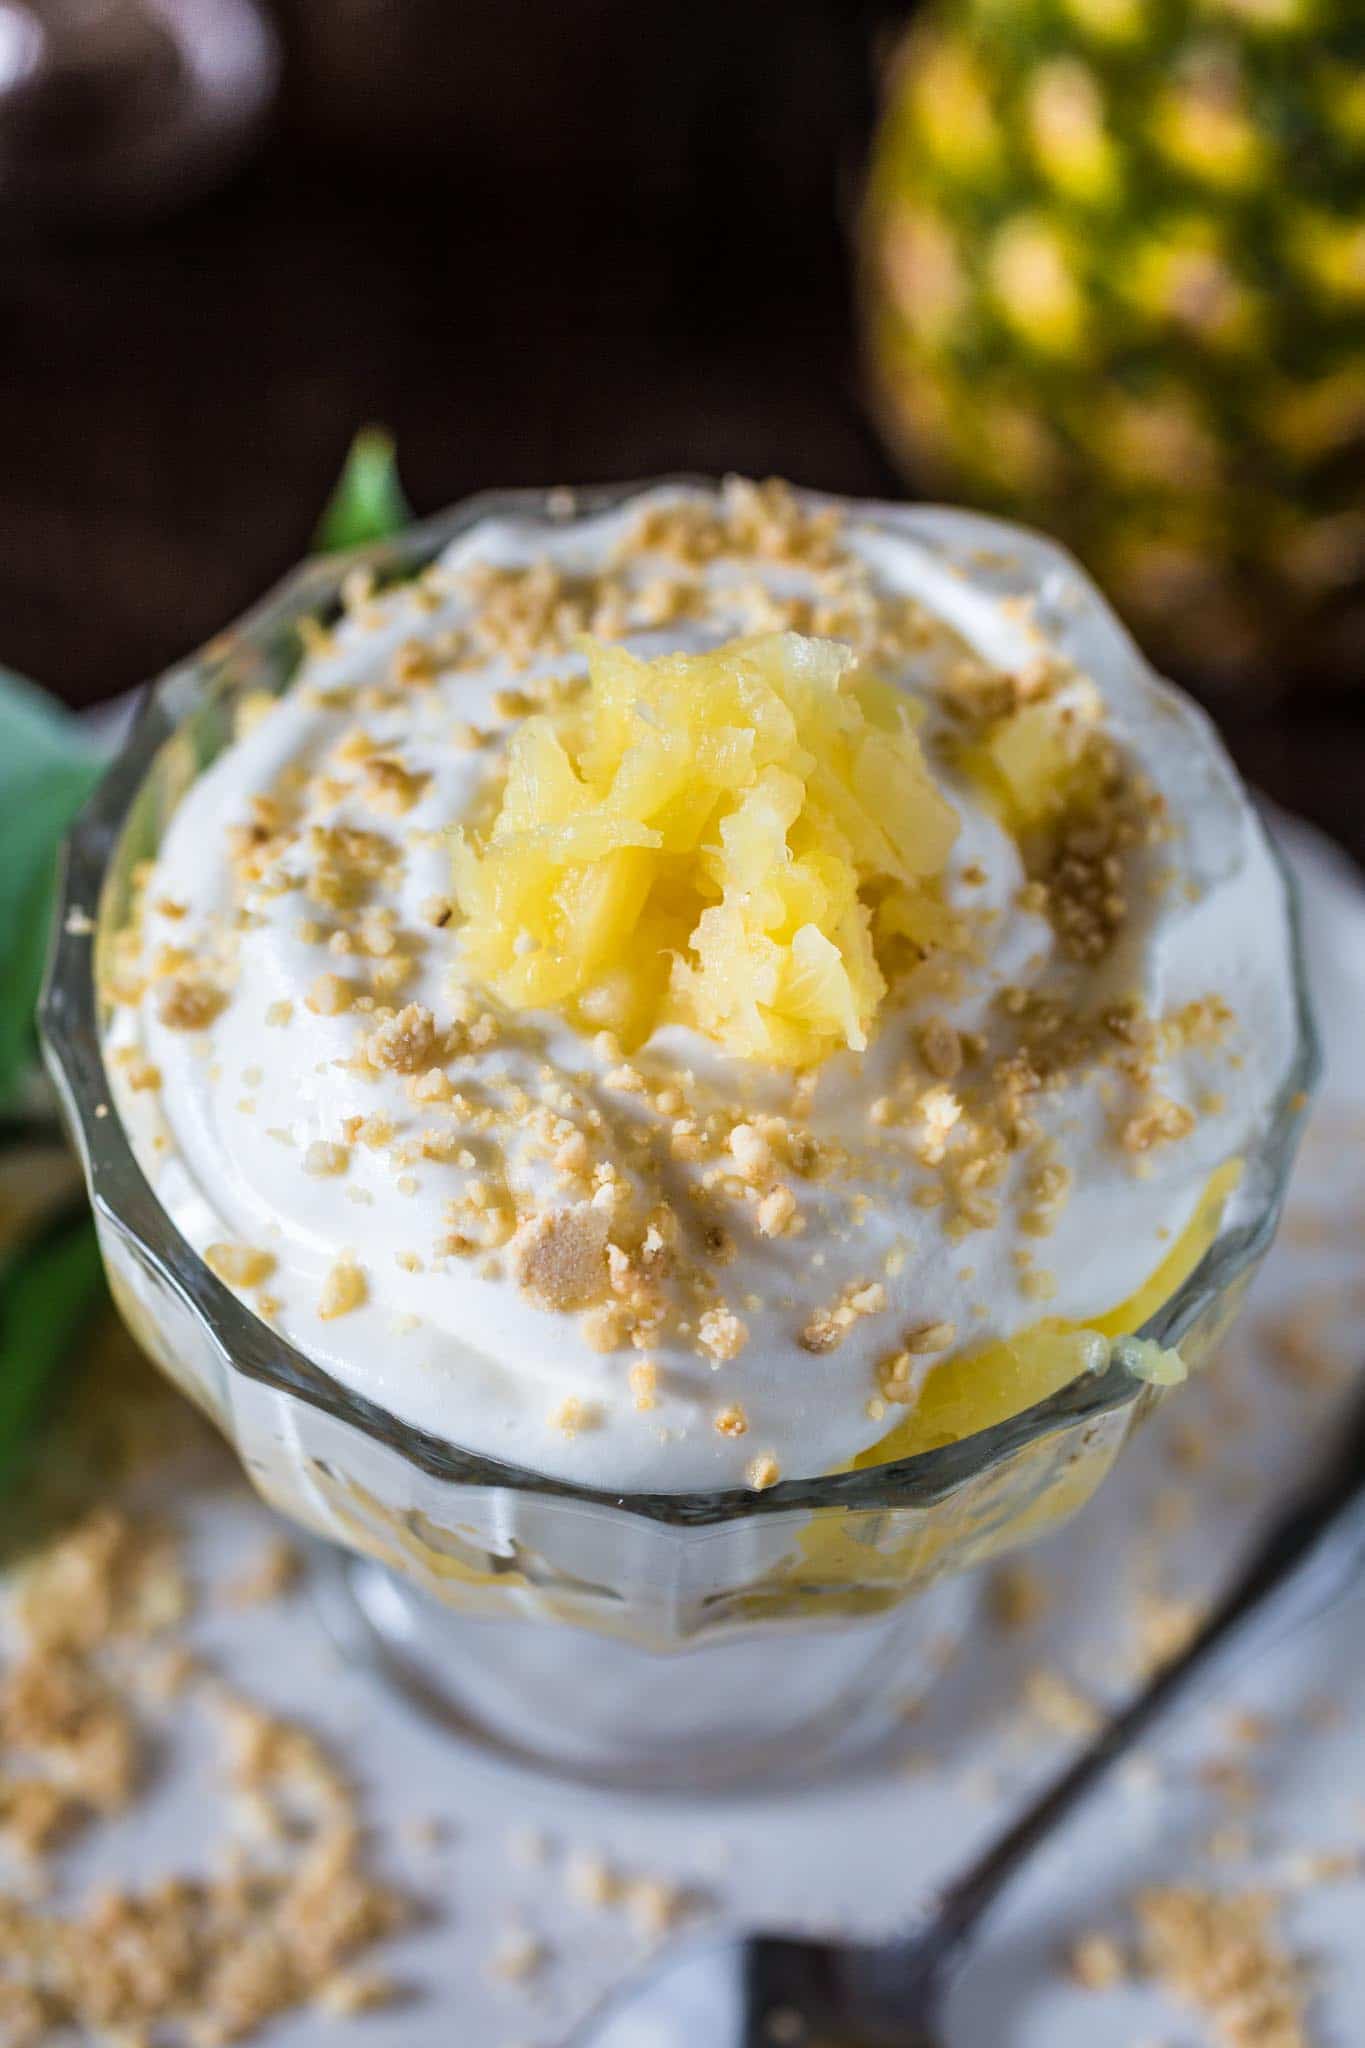 Brazilian Pineapple Dessert | www.oliviascuisine.com | Easy, delicious and tropical. What could be better than that? And don't worry. You get to make this all year round, since it's made with canned pineapples!